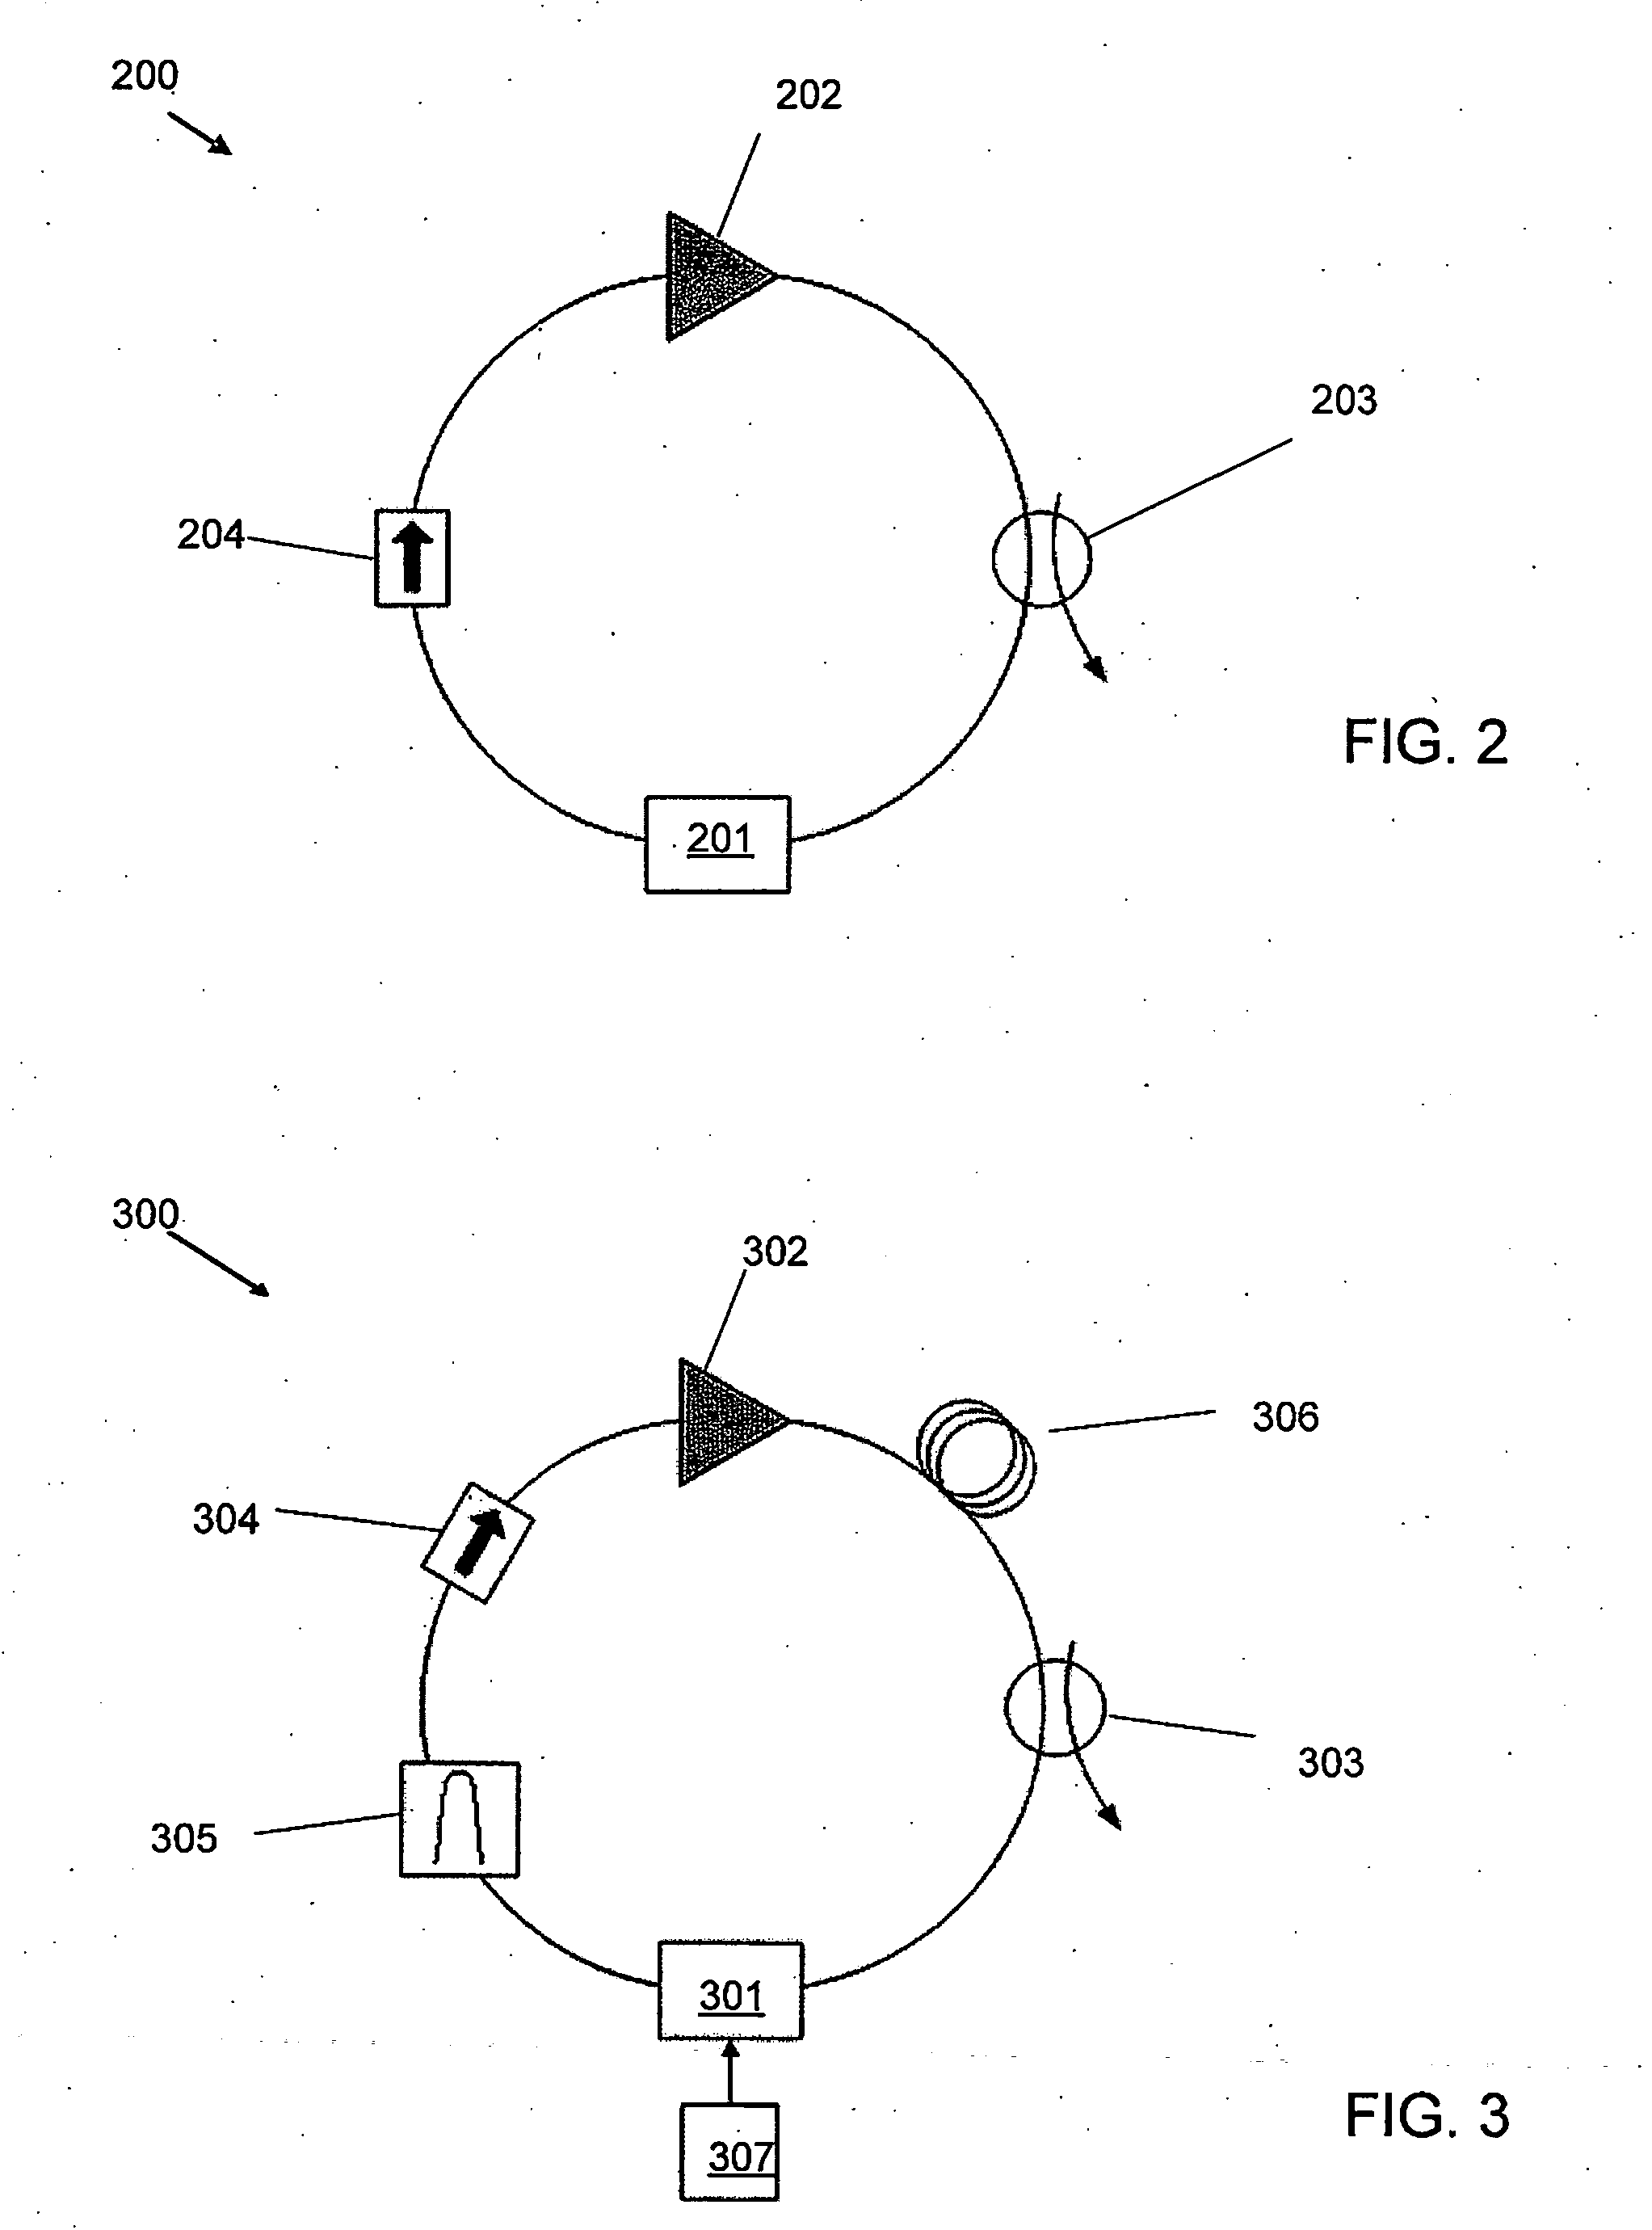 Actively stabilized systems for the generation of ultrashort optical pulses